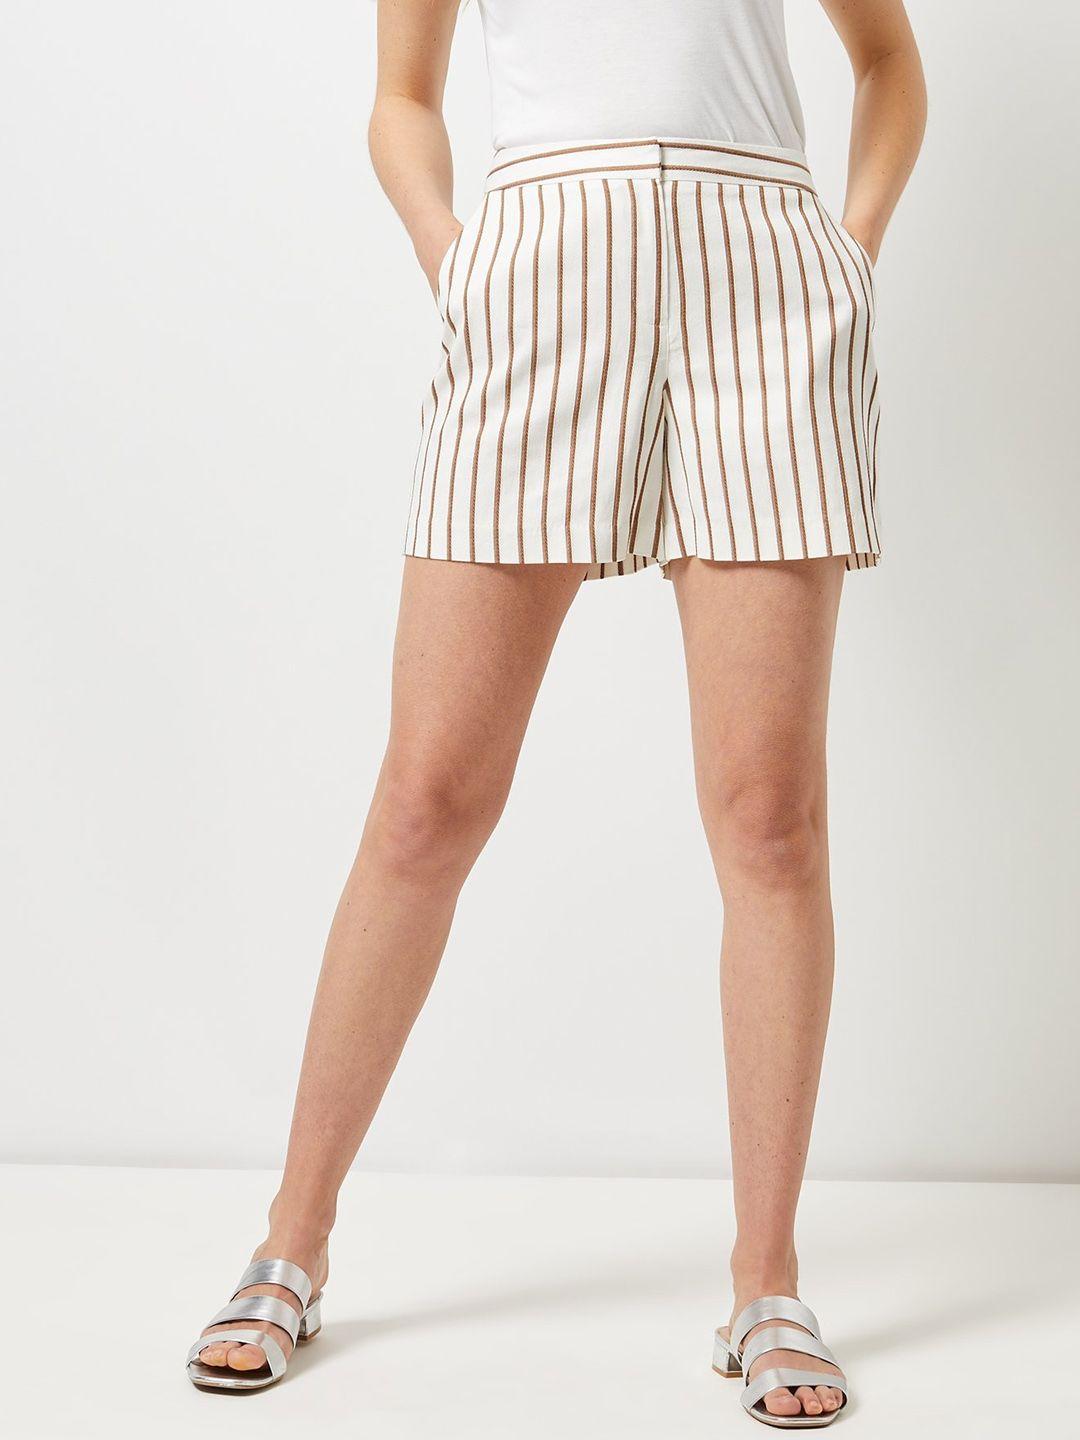 dorothy perkins women off-white & brown striped regular fit shorts